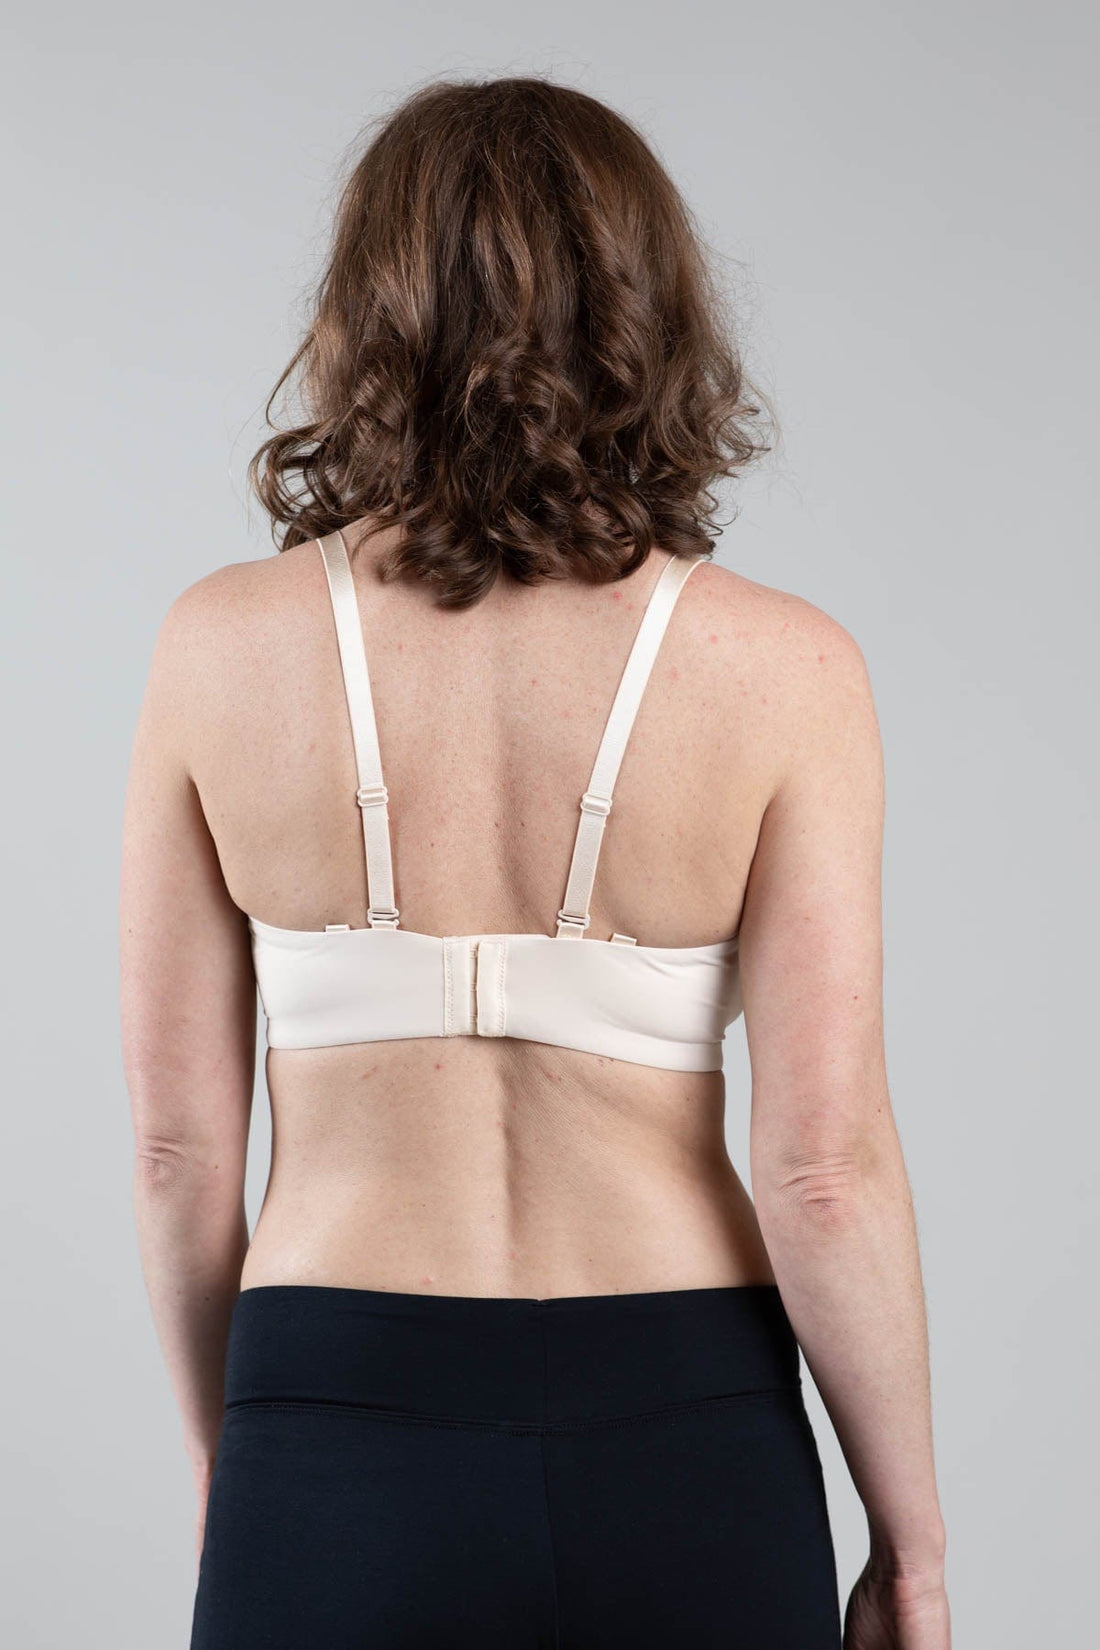 Simple Wishes Undercover nursing t-shirt bra in sunkissed rose with hide the nursing clasp feature shown in back view